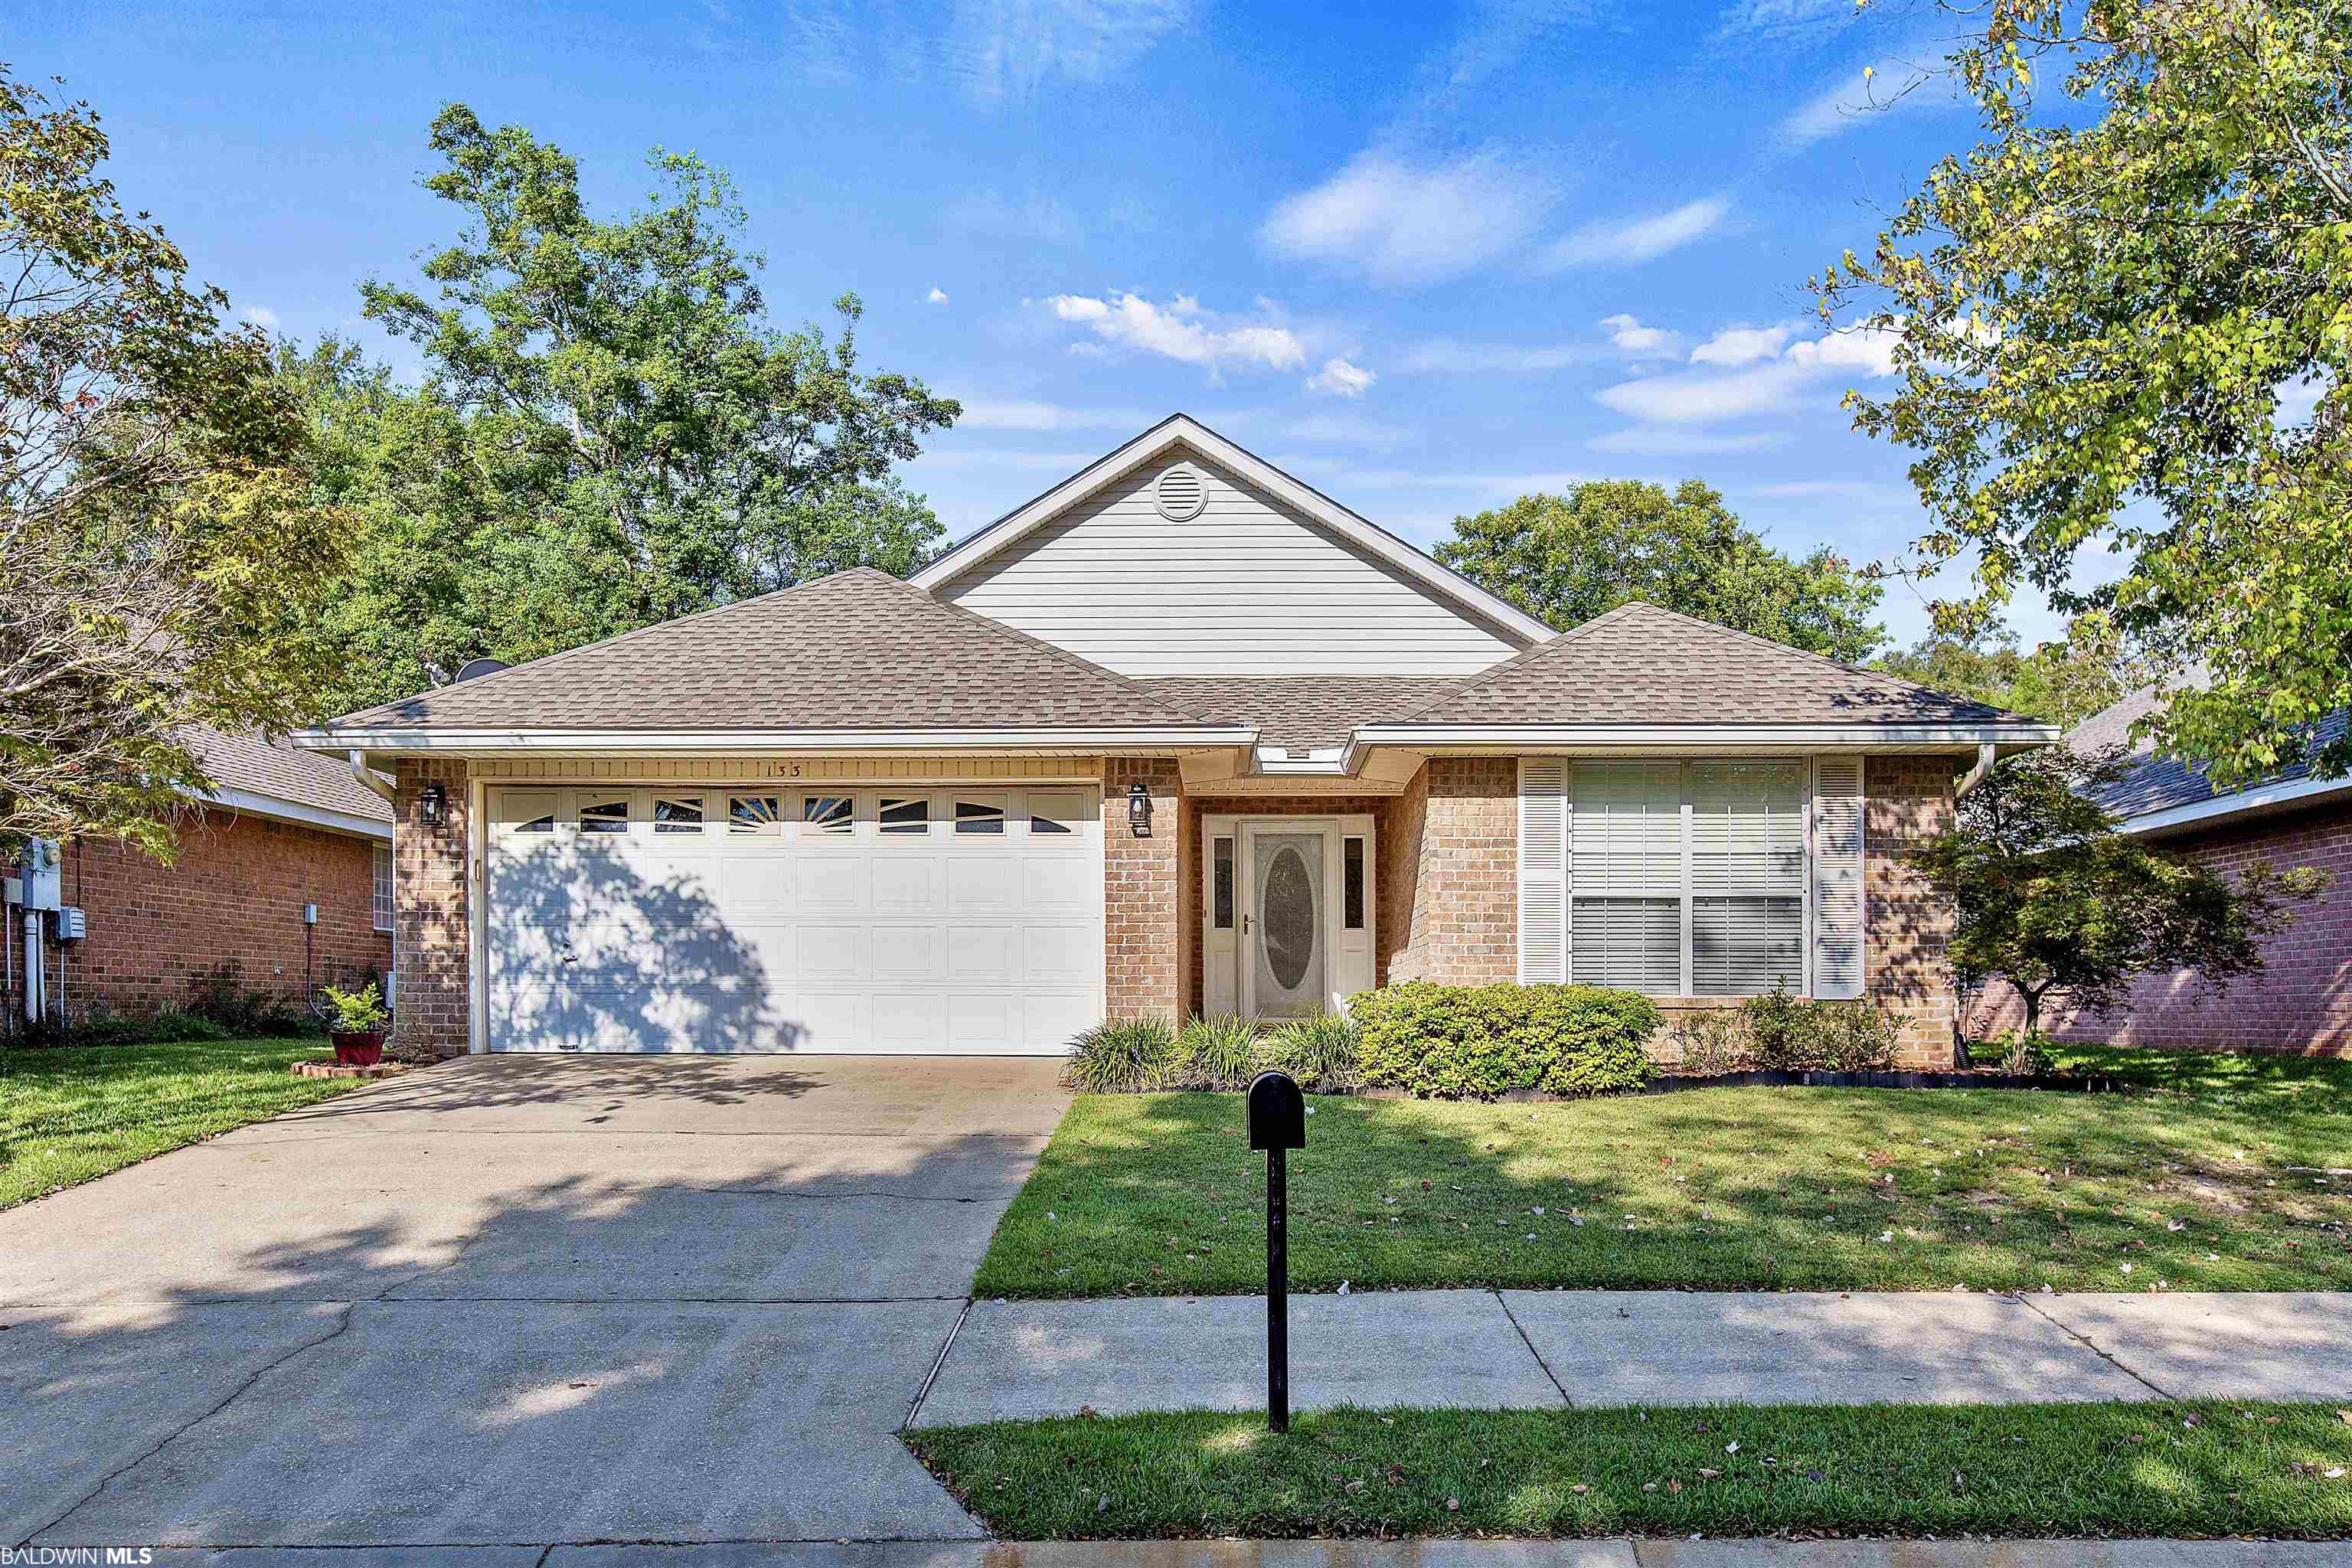 Immaculate Patio Home in Southland Place neighborhood! Single-story brick home features a 2020 FORTIFIED ROOF, HVAC that is less than 1 year old, Metal hurricane panels, attached Double Garage, 3 Bedroom 2 Bath Split Bedroom plan, Patio and Fenced Back yard, and Storage Shed.  Move-in ready for the new owner!  Hurry to see it today! All Information provided is deemed reliable but not guaranteed. Buyer or buyer’s agent to verify all information.